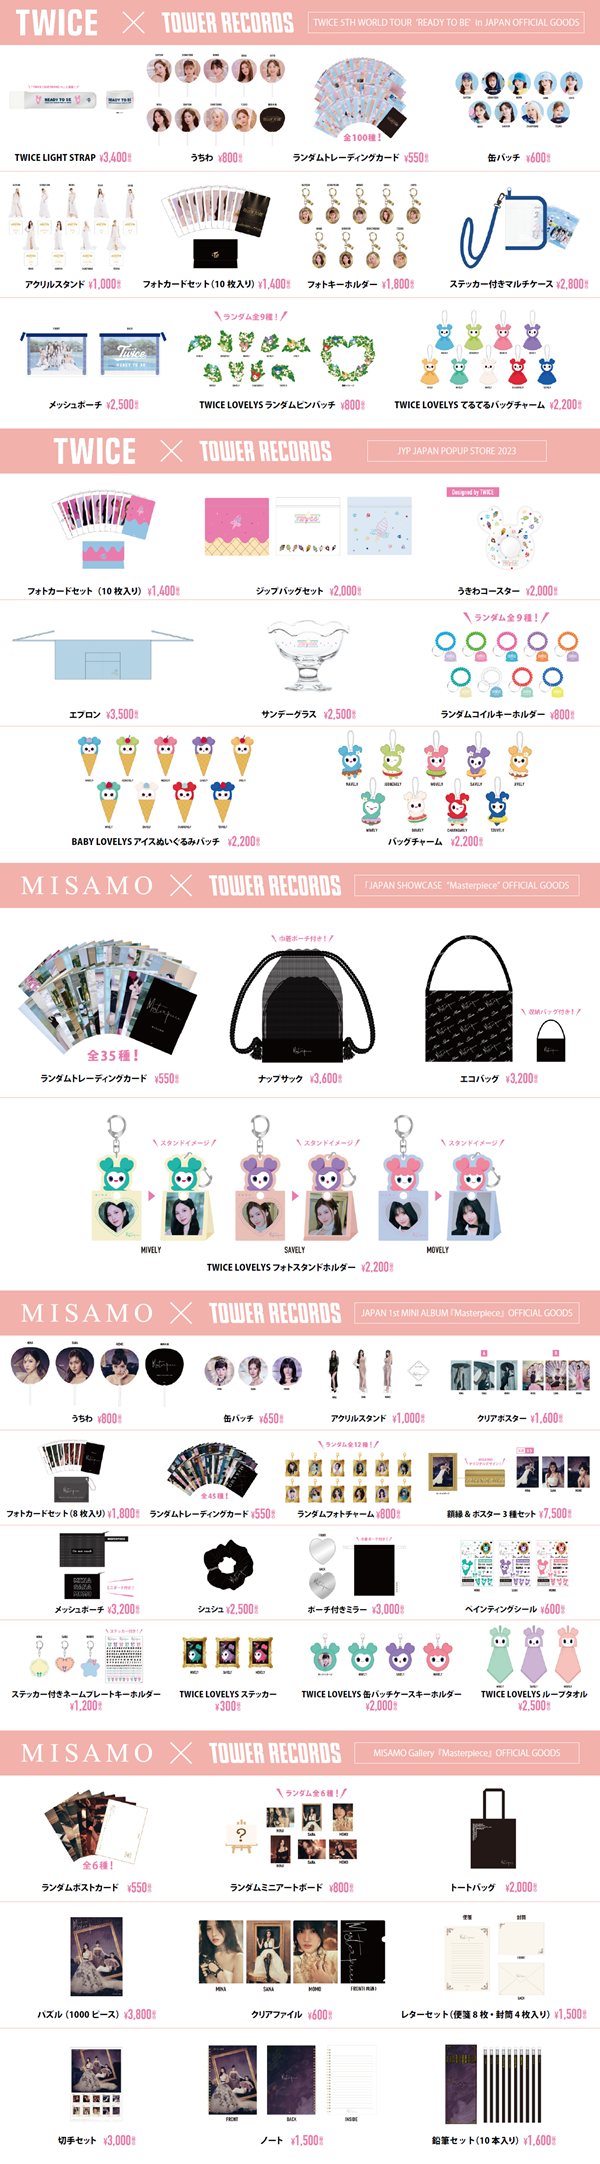 TWICE/MISAMO OFFICIAL GOODS 販売実施！ - TOWER RECORDS ONLINE